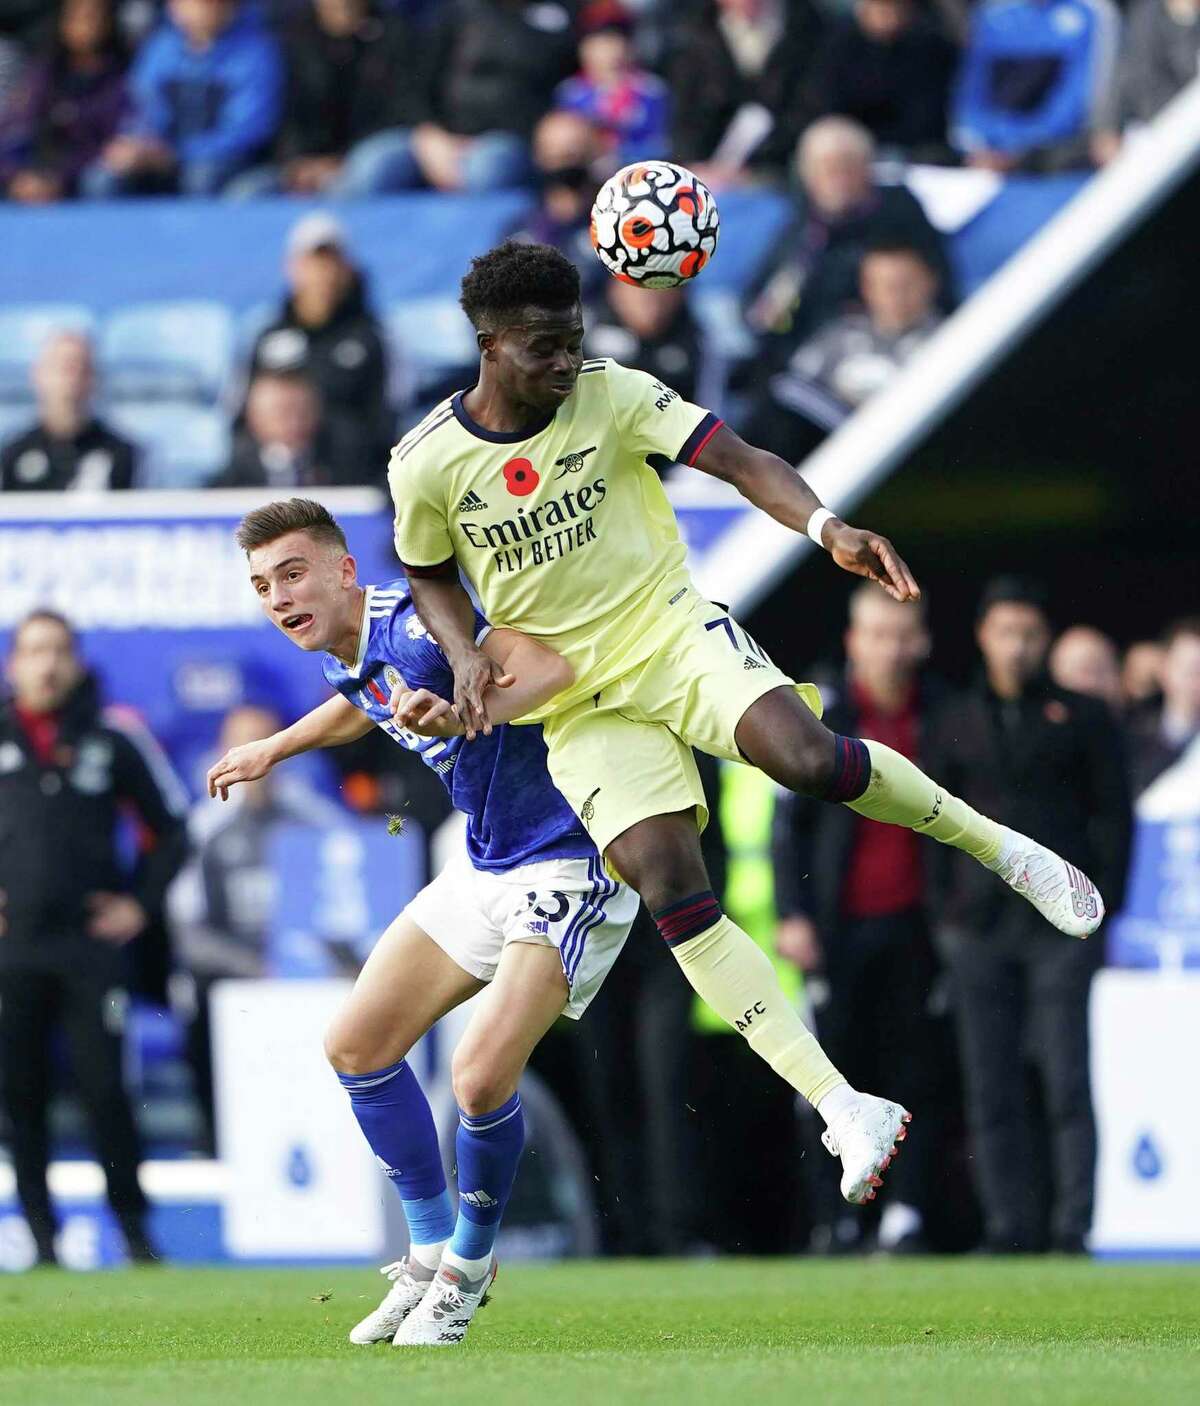 Leicester City's Luke Thomas, left and Arsenal's Bukayo Saka battle for the ball, during the English Premier League soccer match between Leicester City and Arsenal, at the King Power Stadium, in Leicester, England, on Saturday, Oct. 30, 2021. The game was carried on Stamford-based NBC Sports’ NBCSN channel, which will shut down on Dec. 31, 2021. NBC Sports will continue its Premier League coverage on the cable USA Network and other NBCUniversal platforms.